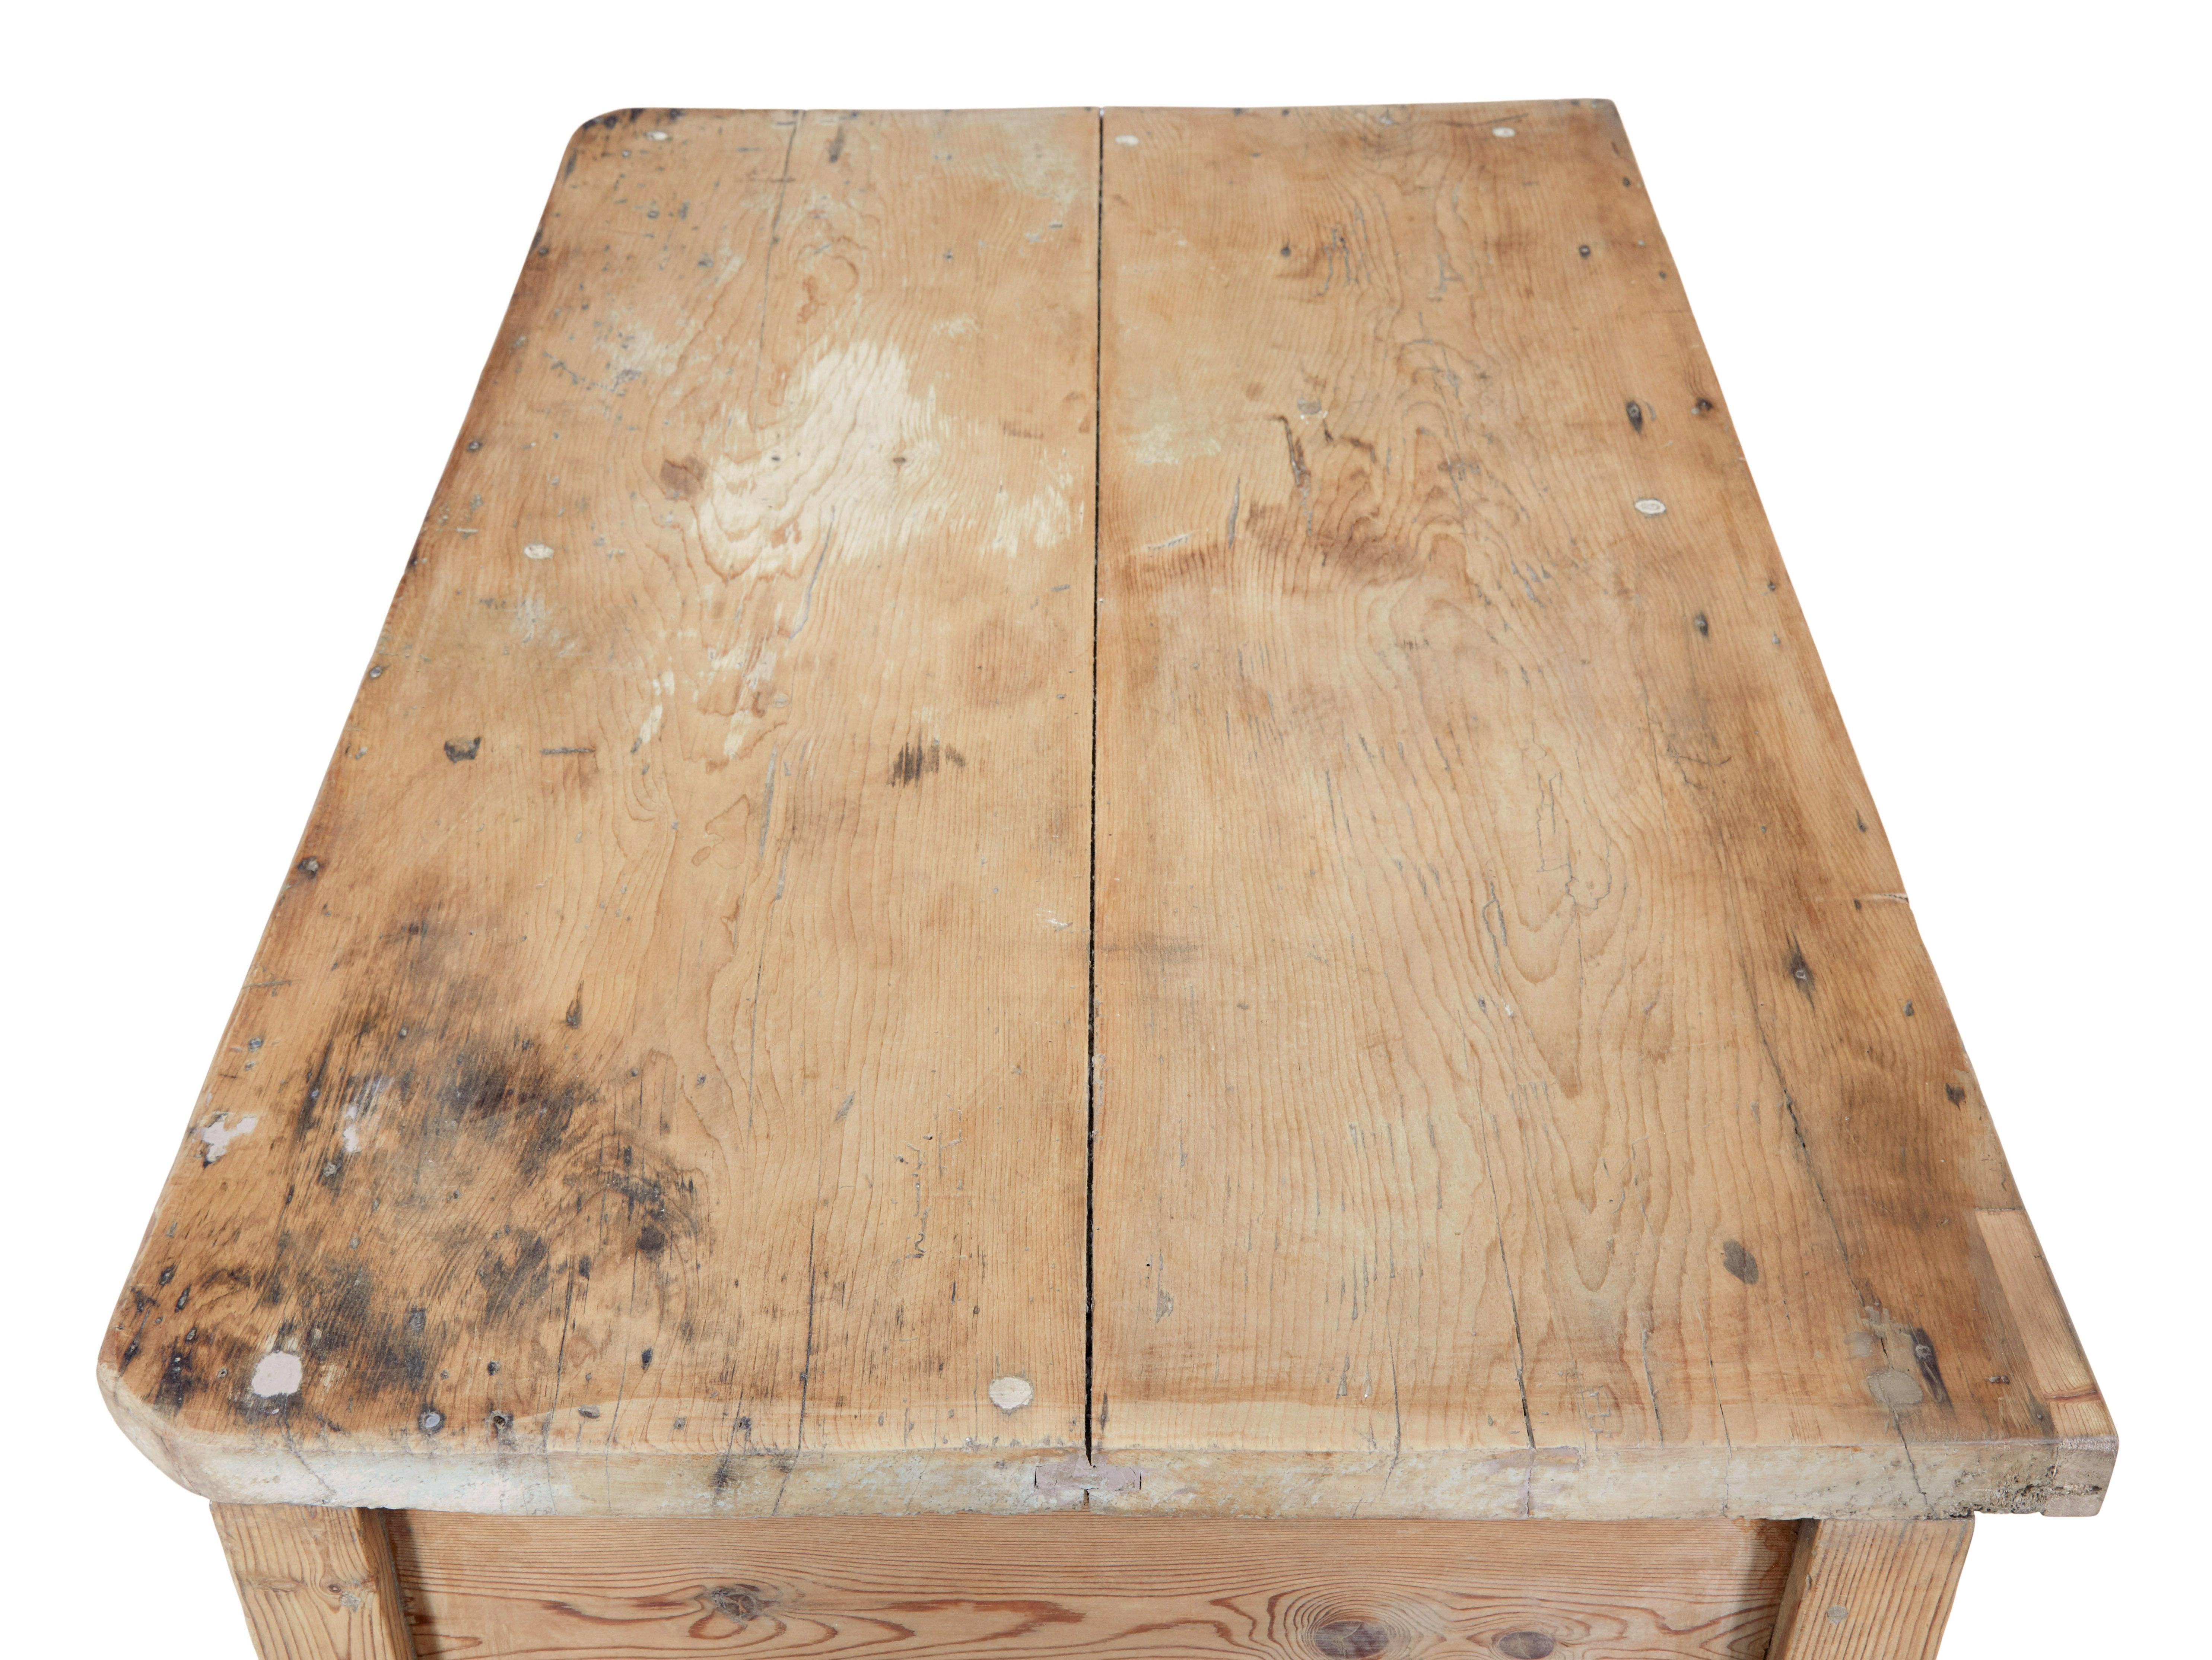 Rustic 19th century victorian pine kitchen table circa 1880.

Here we present a table that makes and ideal kitchen table or even a desk.  2 plank pine top, with 2 drawers below which are fitted with replaced handles.  Shaped freize above the knee. 